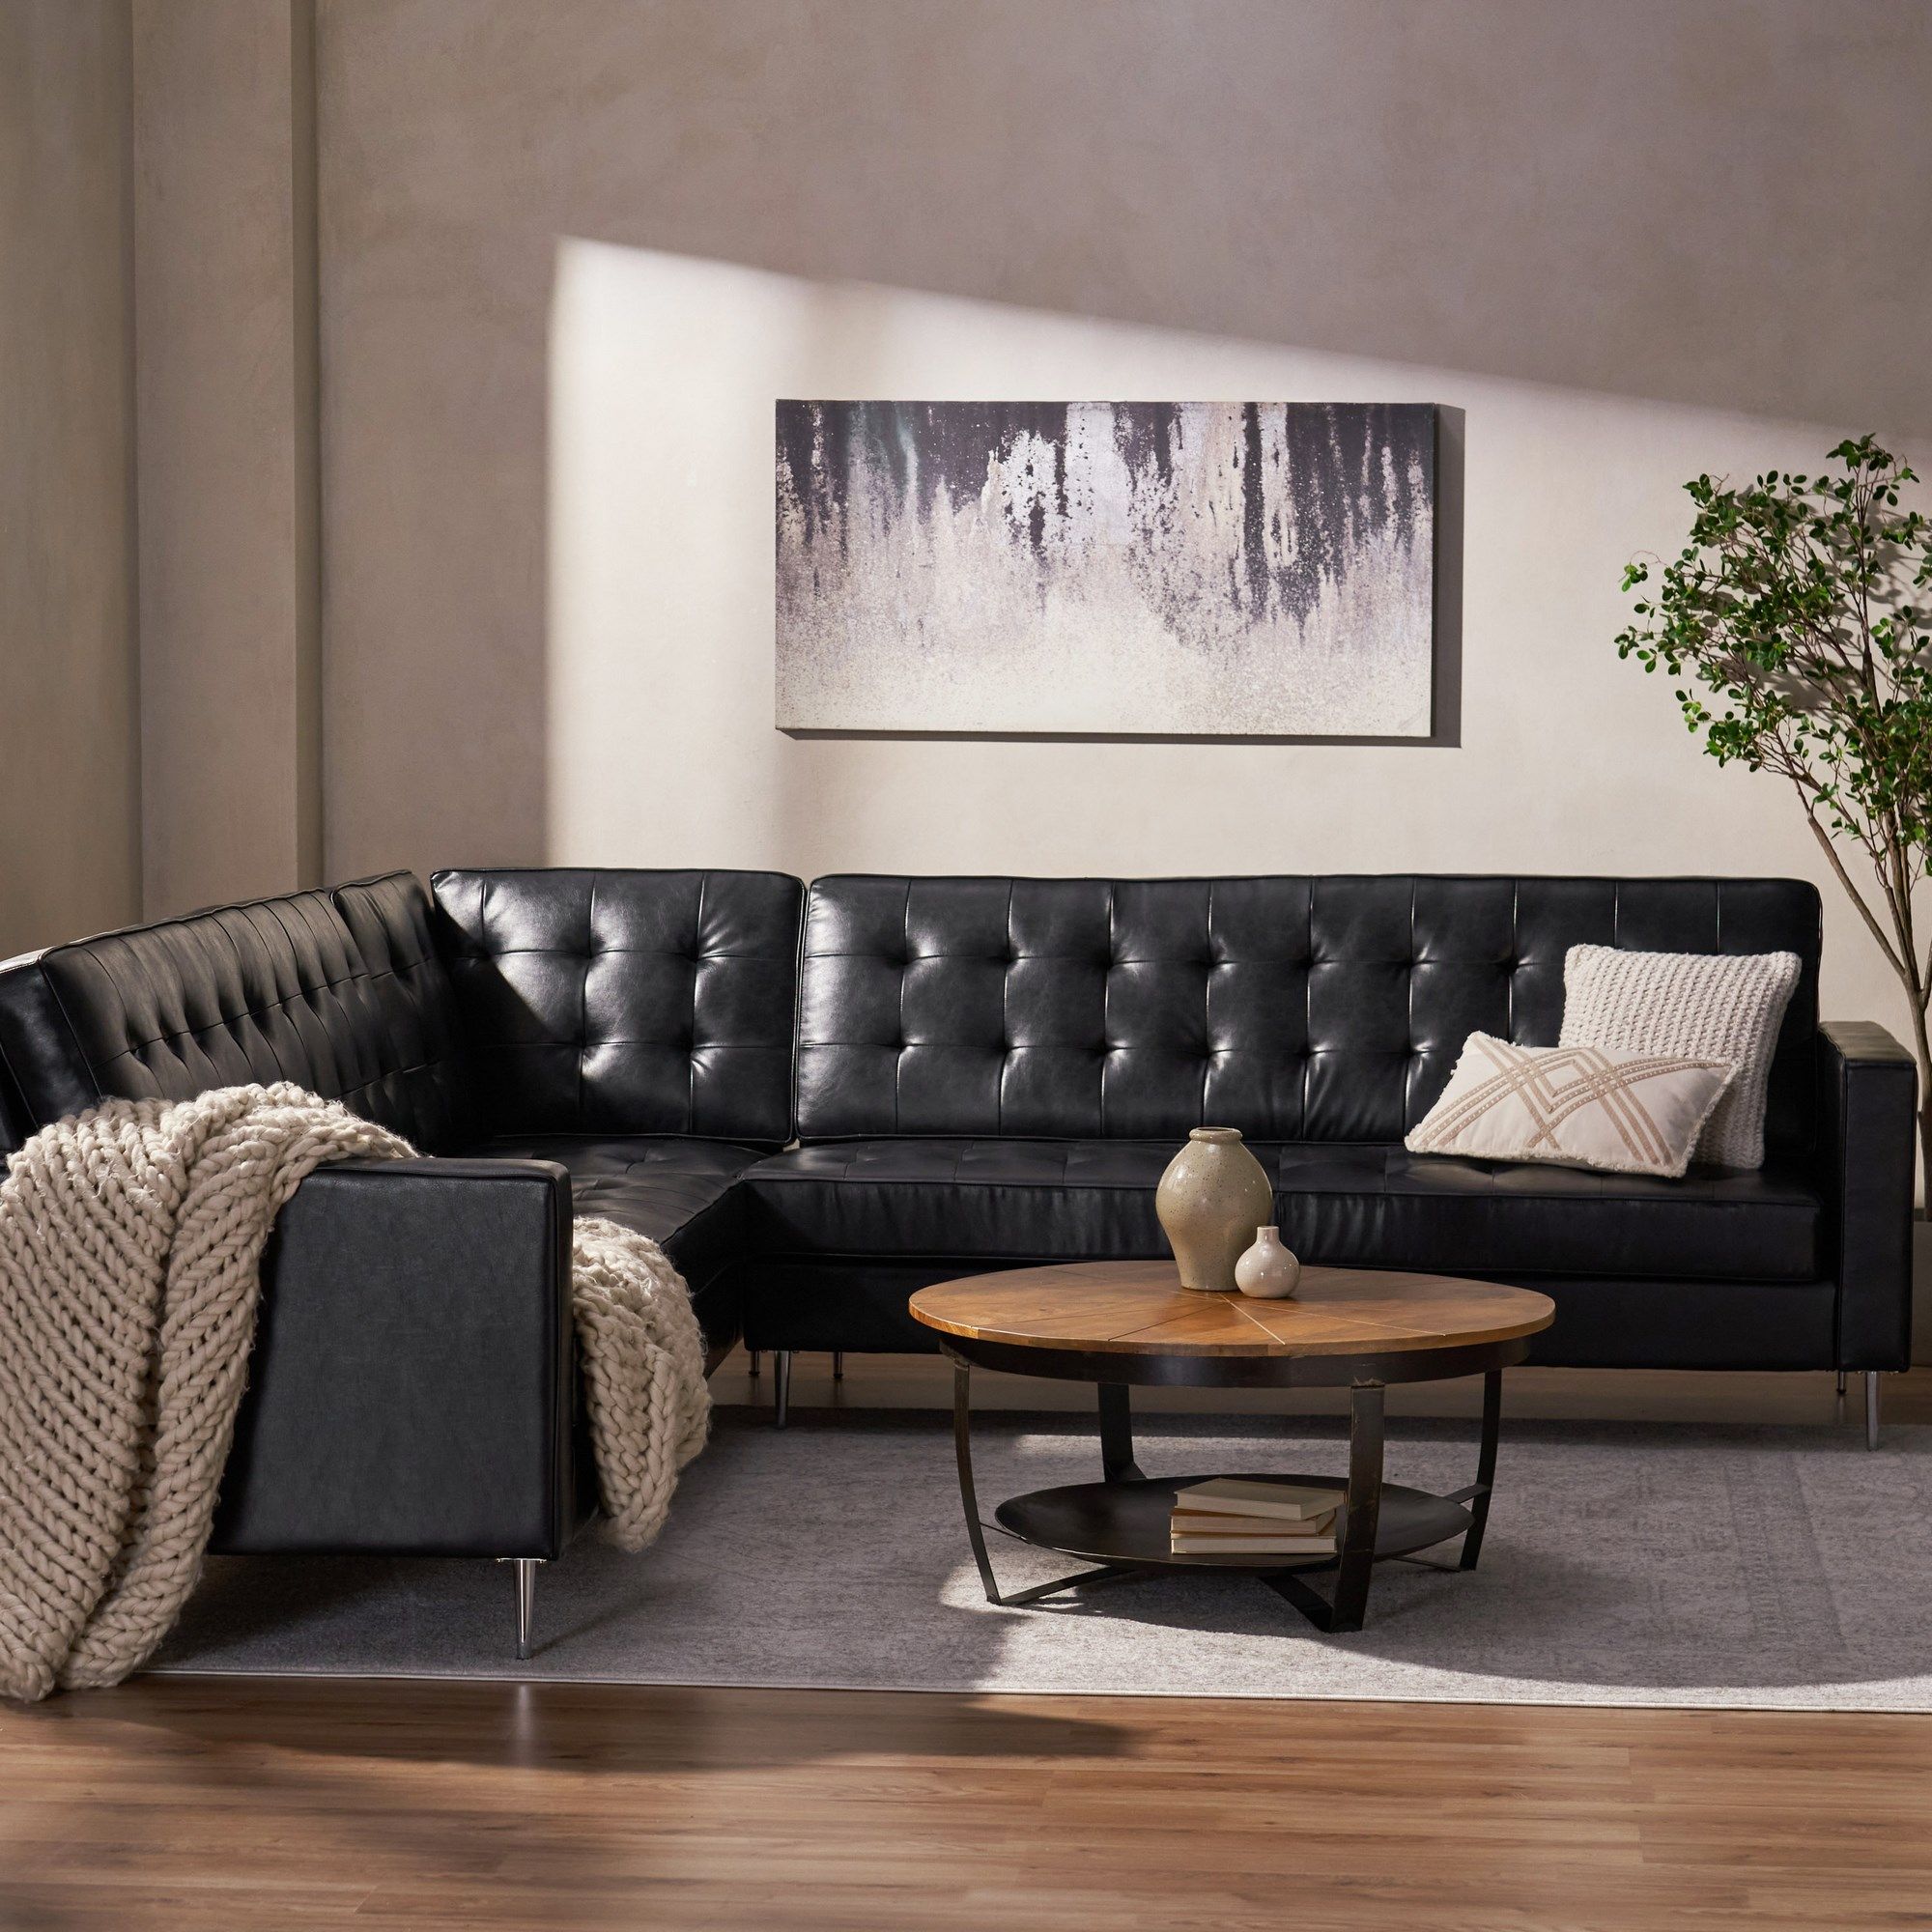 Gebo Contemporary Faux Leather Tufted 5 Seater Sectional Sofa Set, Midnight  Black And Chrome Pertaining To Faux Leather Sectional Sofa Sets (View 10 of 15)